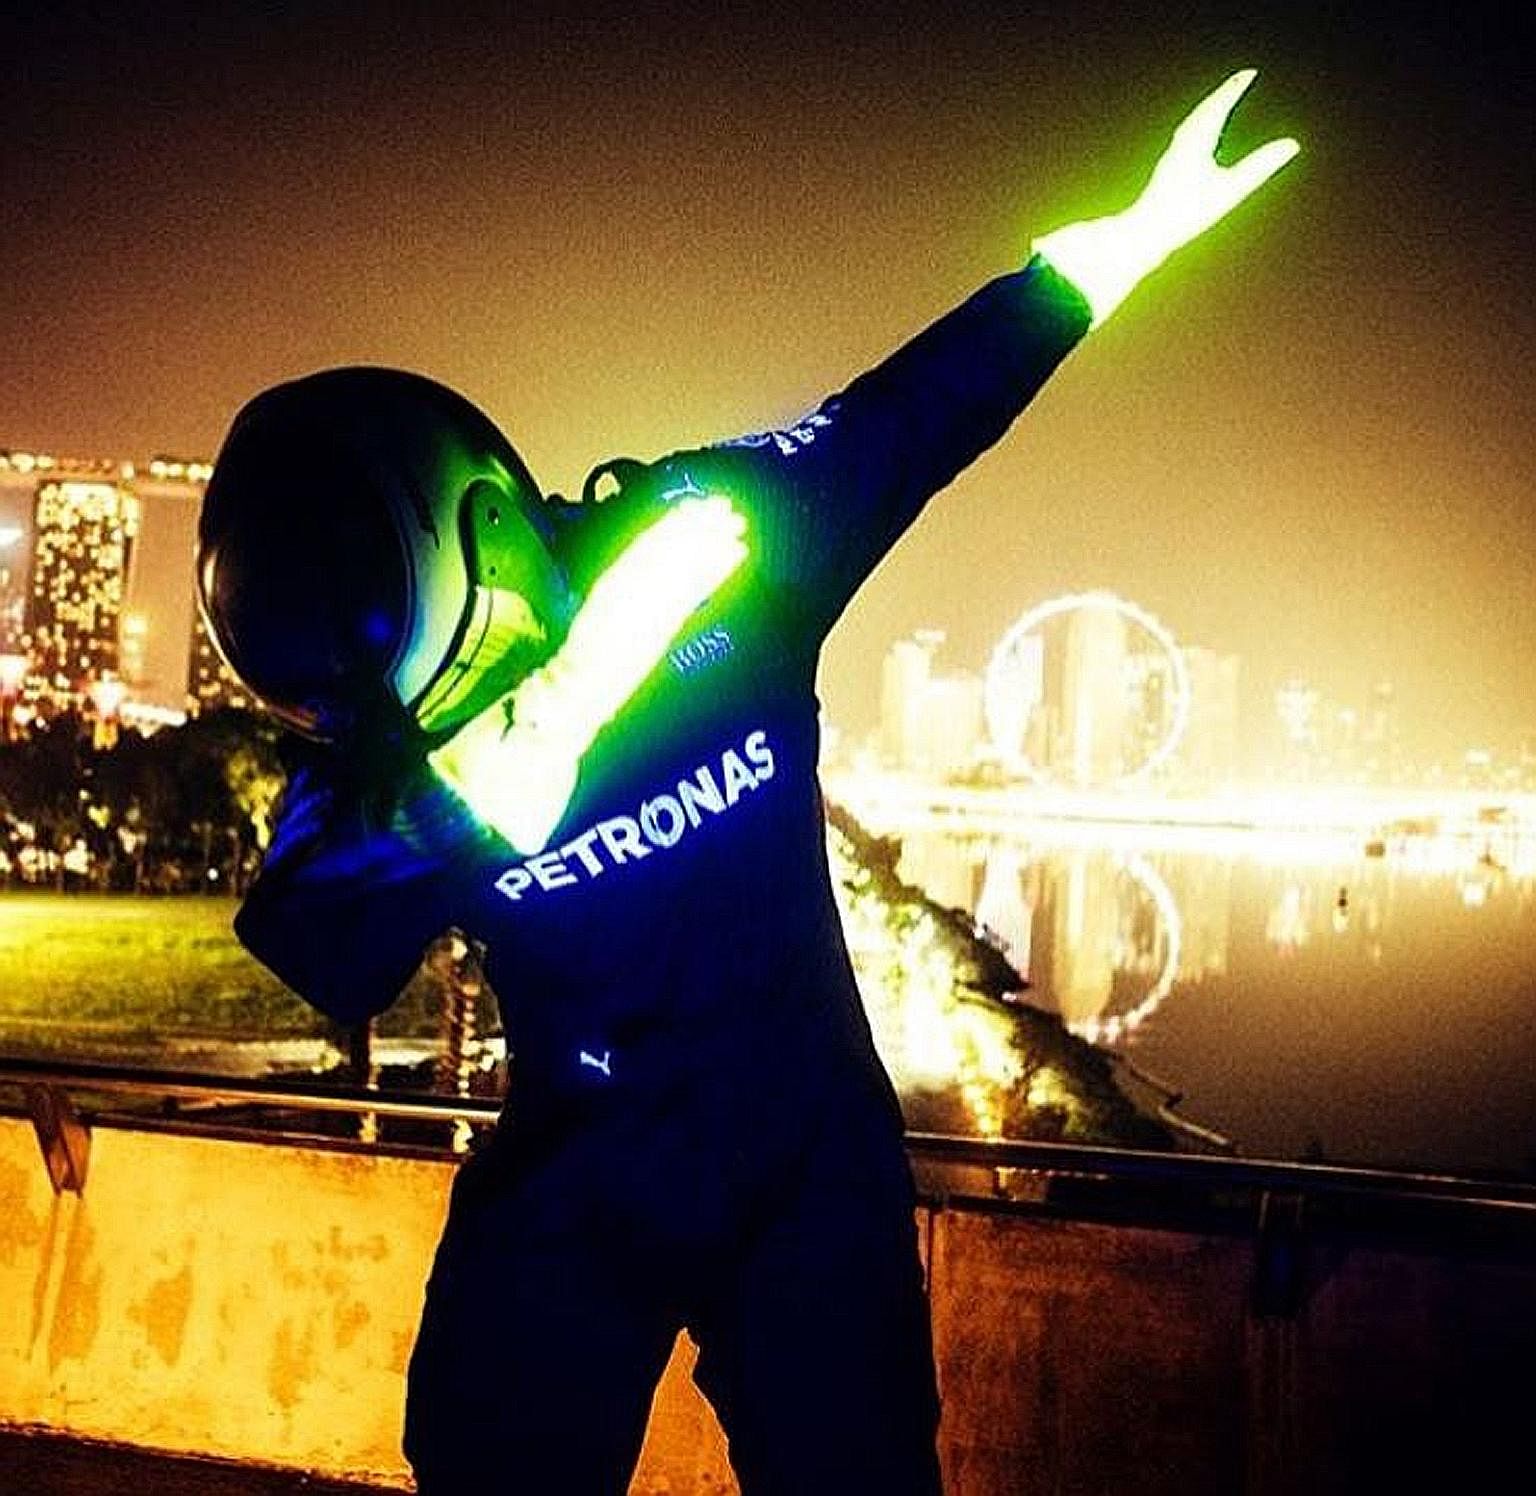 Cool! Stunning! Spectacular! Take a bow, we can only describe this dab in glowing terms.